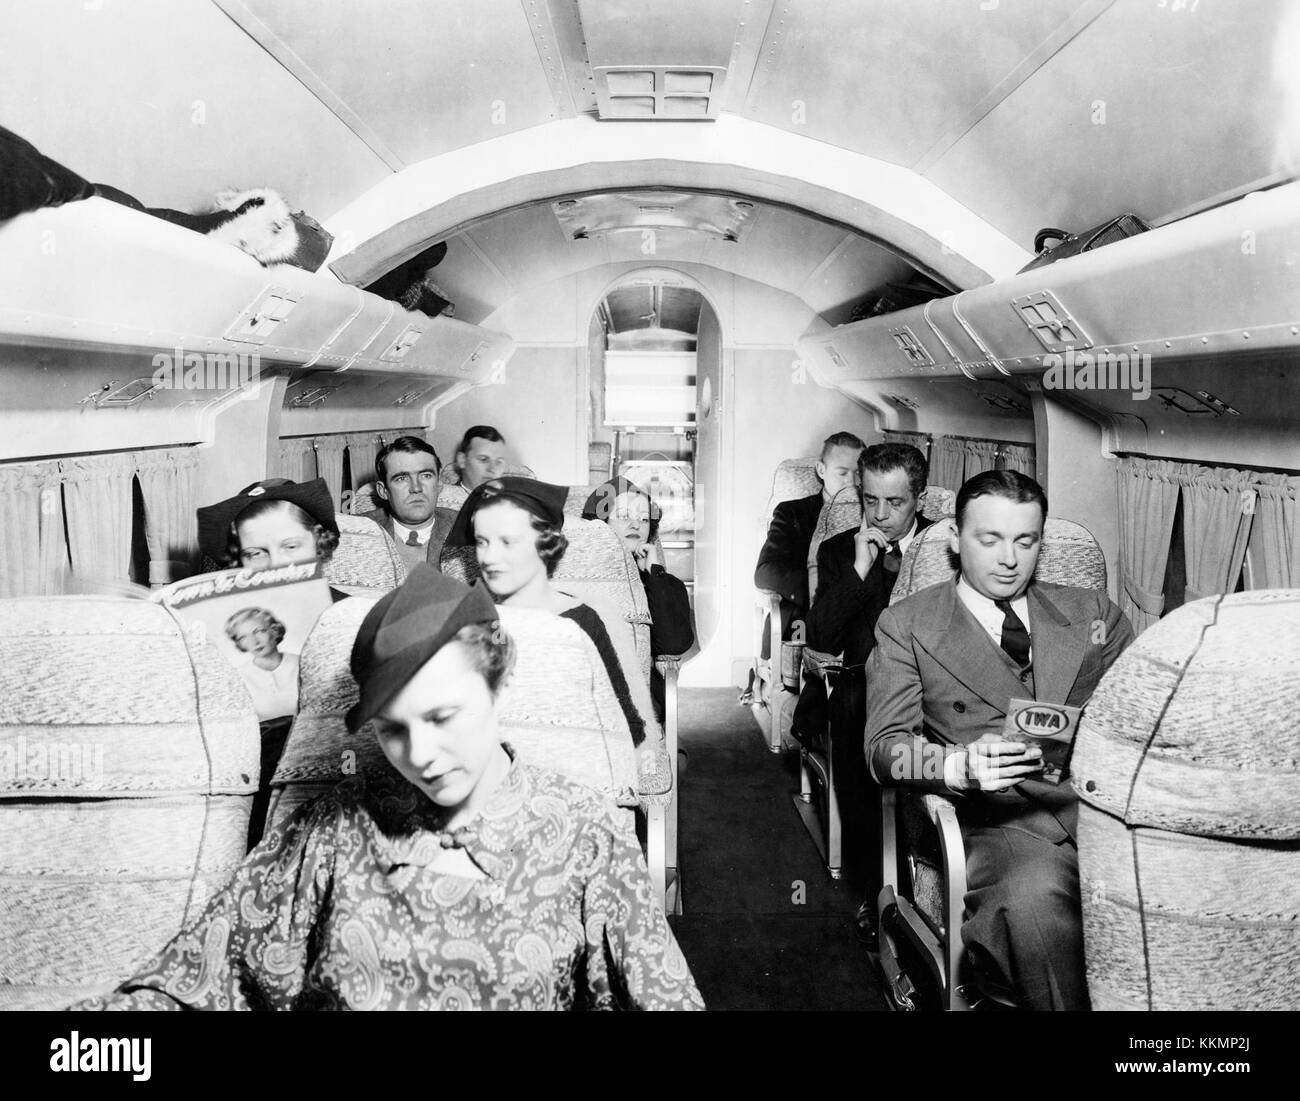 Posed interior view of passenger cabin of a Pan American Airways (PAA) Sikorsky S-43A Amphibion (Baby Clipper) with seated passengers. Rear access door is open showing a Pan American Airways life ring stowed behind the ladder. Note man at right foreground reading a TWA timetable. Circa 1936. Interior view of a Pan Am Sikorsky S-43A (Baby Clipper) Stock Photo